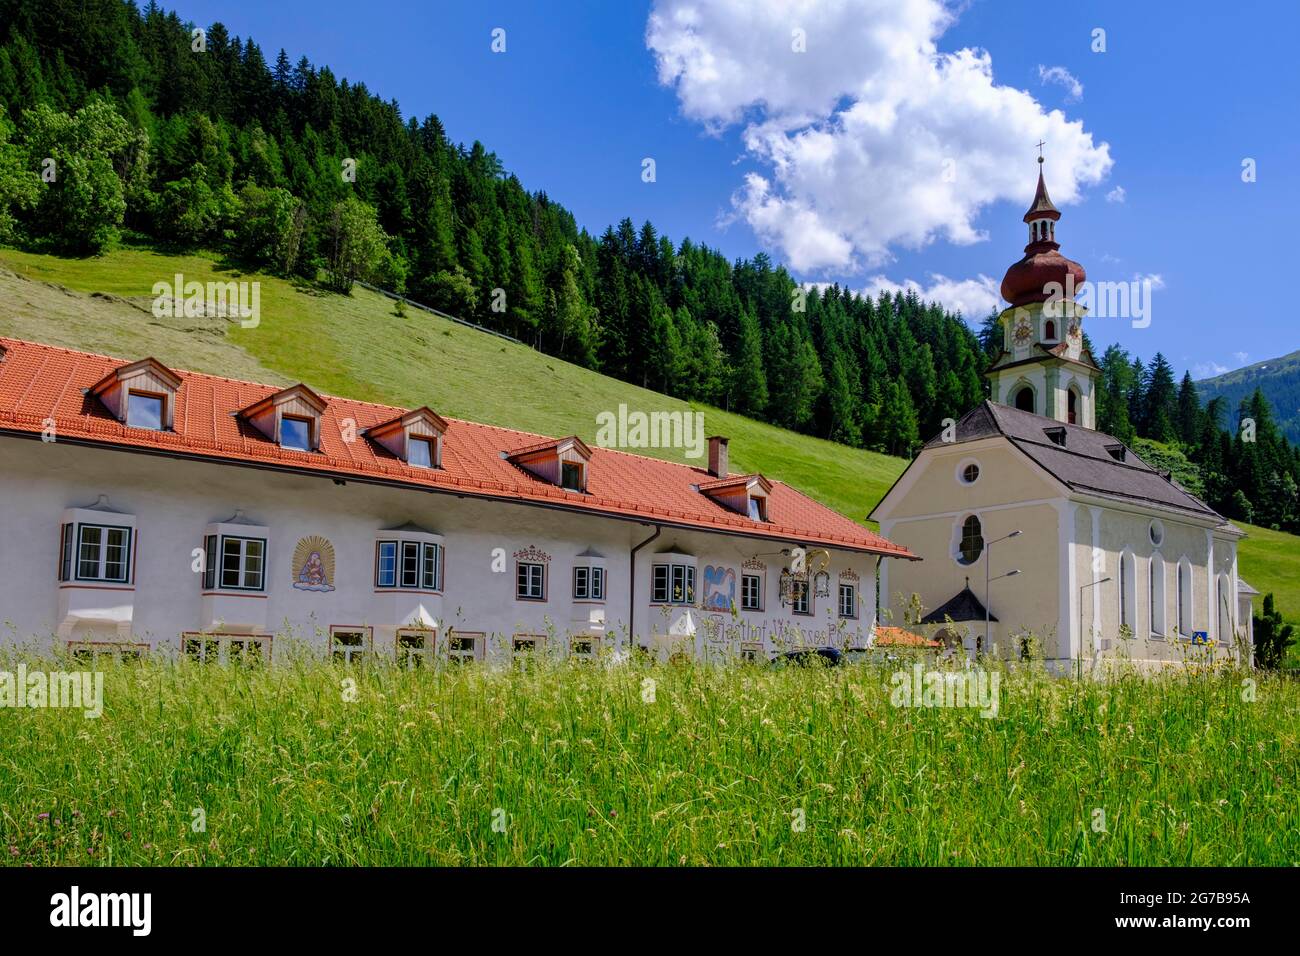 Parish Church of the Visitation of the Virgin Mary and Weisses Roessl Inn, Gries am Brenner, Wipptal, Tyrol, Austria Stock Photo